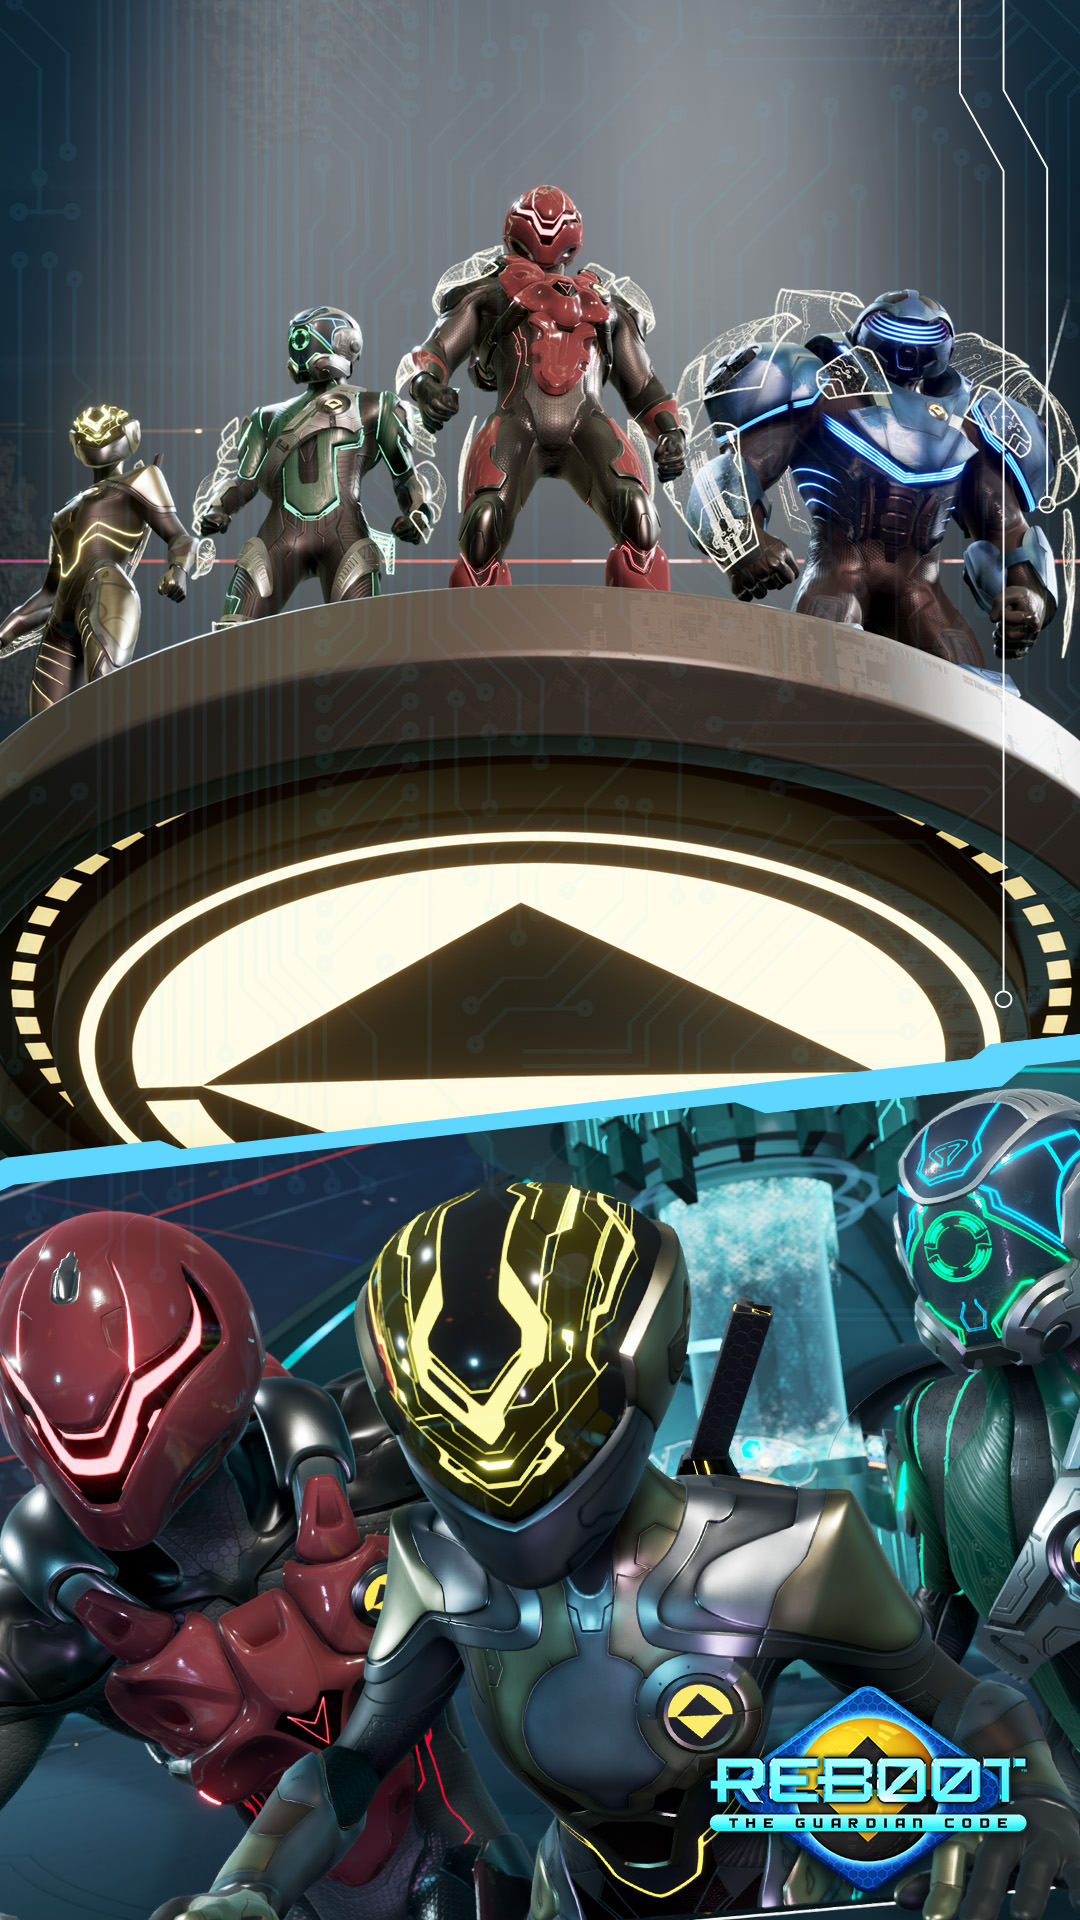 ReBoot: The Guardian Code – the VR Power Rangers